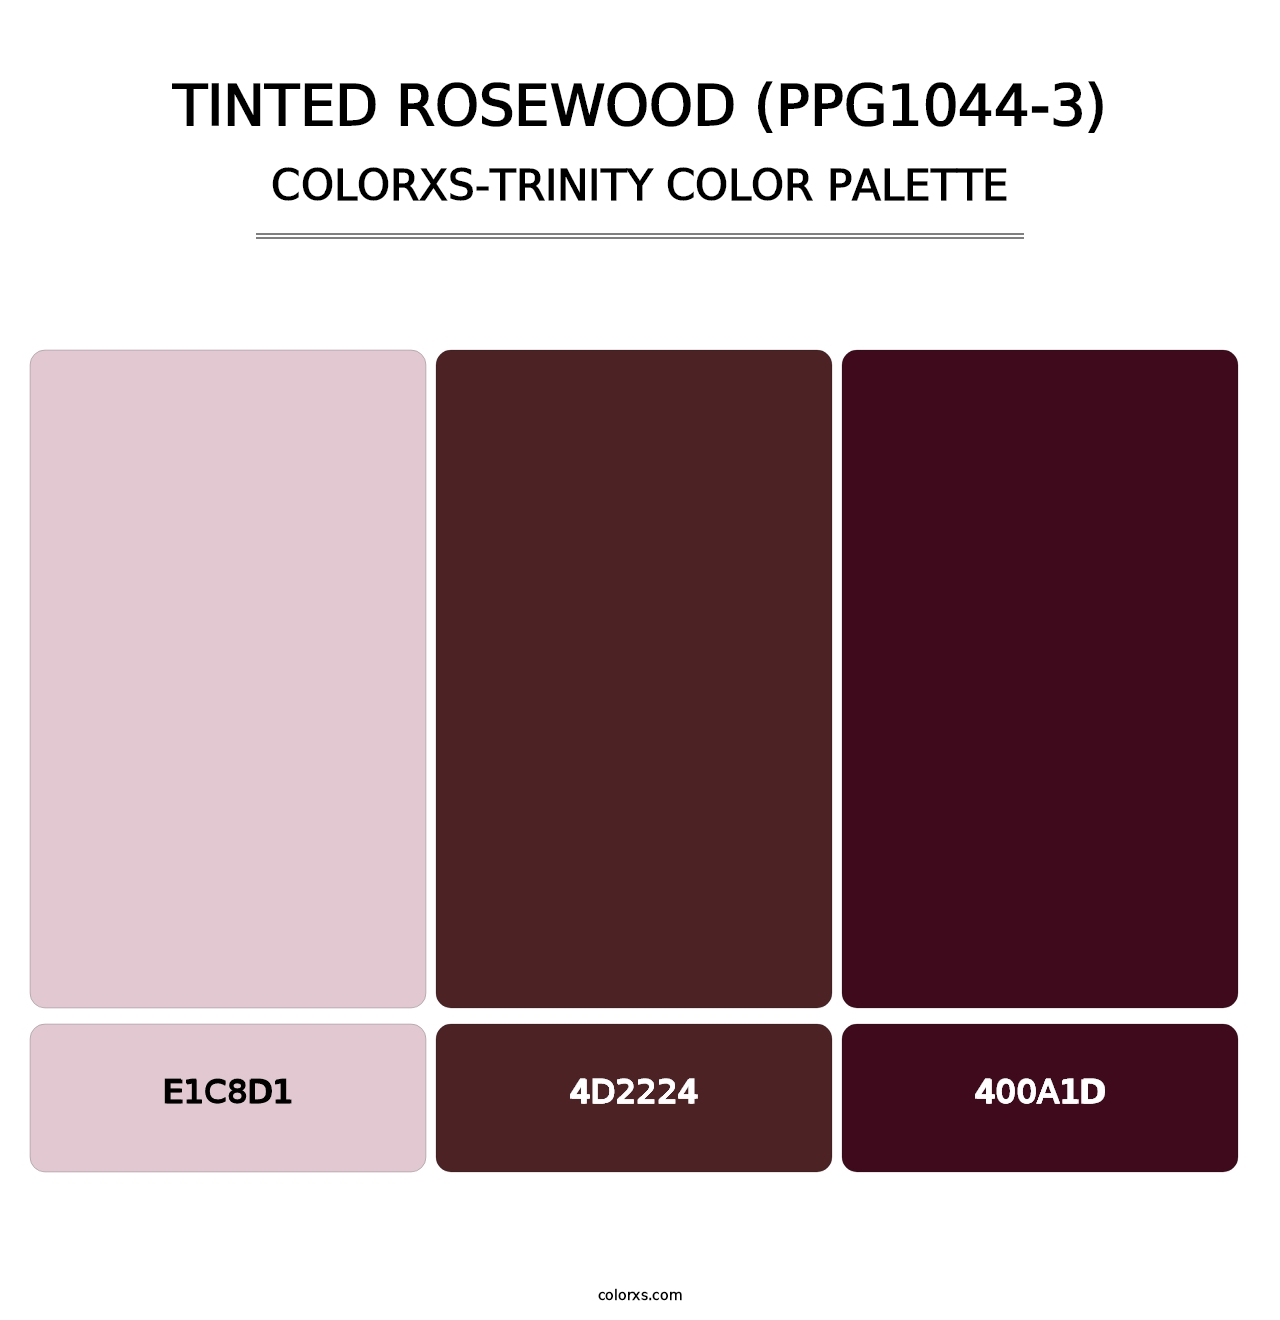 Tinted Rosewood (PPG1044-3) - Colorxs Trinity Palette